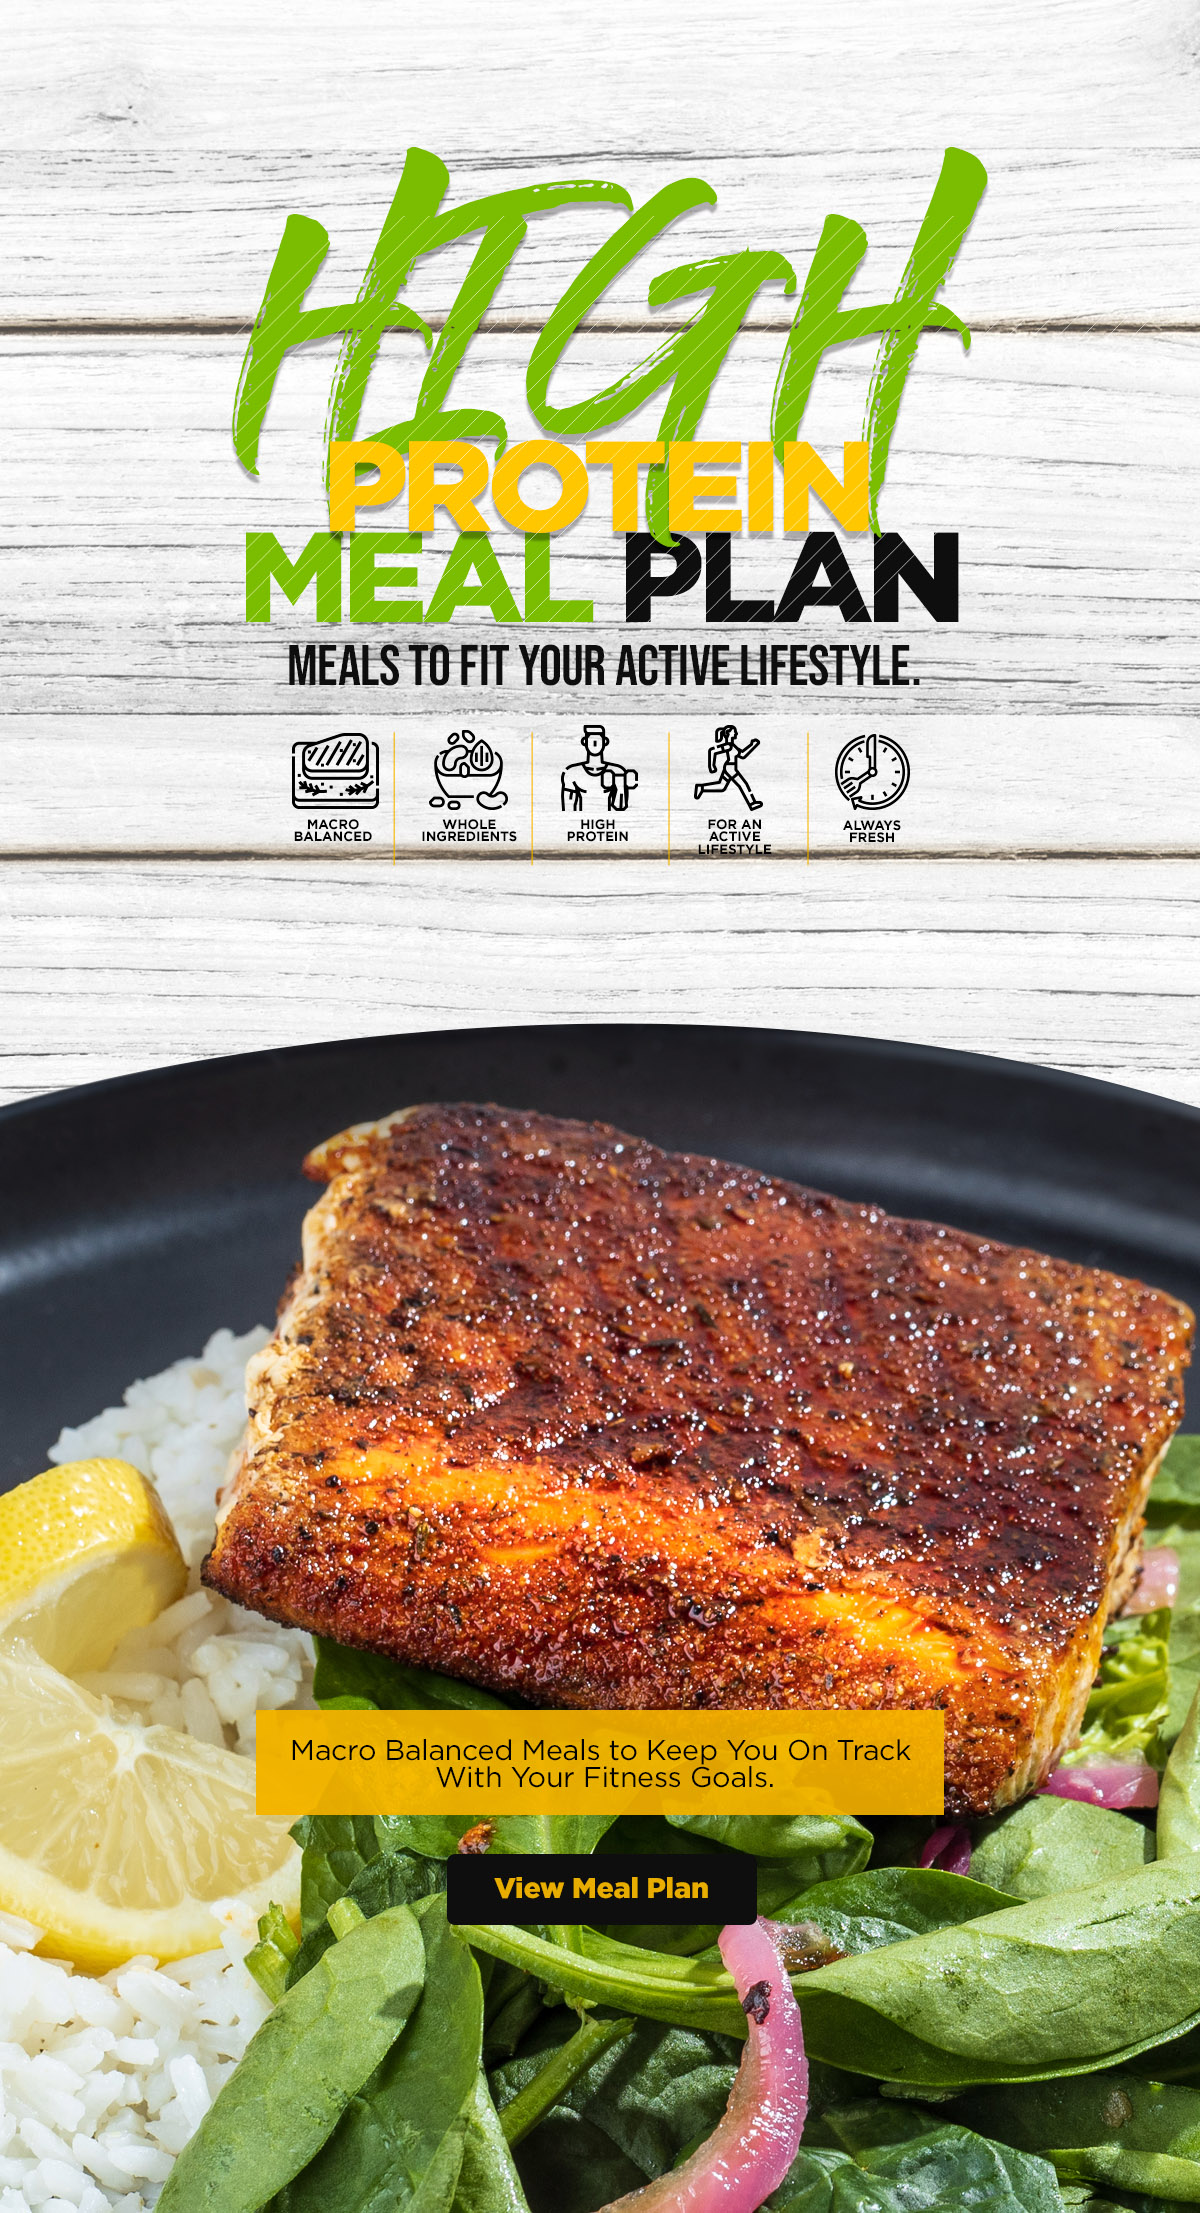 High Protein Meal Plan - Meals to Fit Your Active Lifestyle.